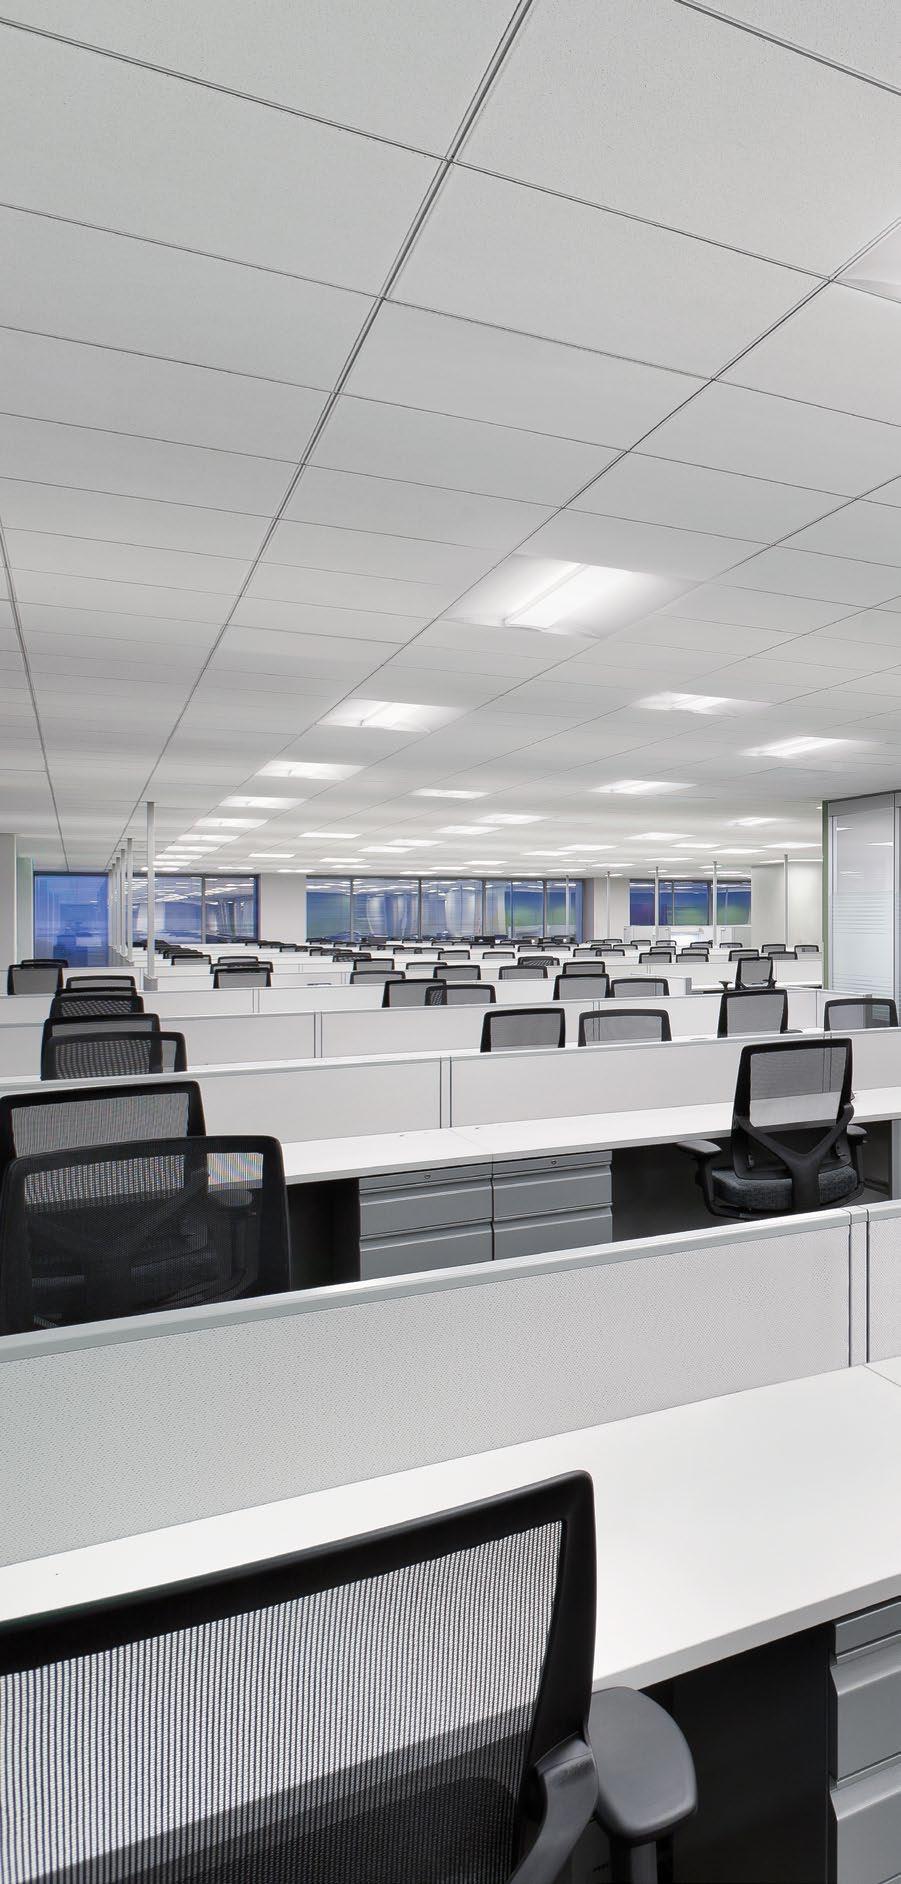 Code compliance and energy savings should not be complex Upgrade your lighting system to Philips LED, and rest assured that you are meeting code regulations.